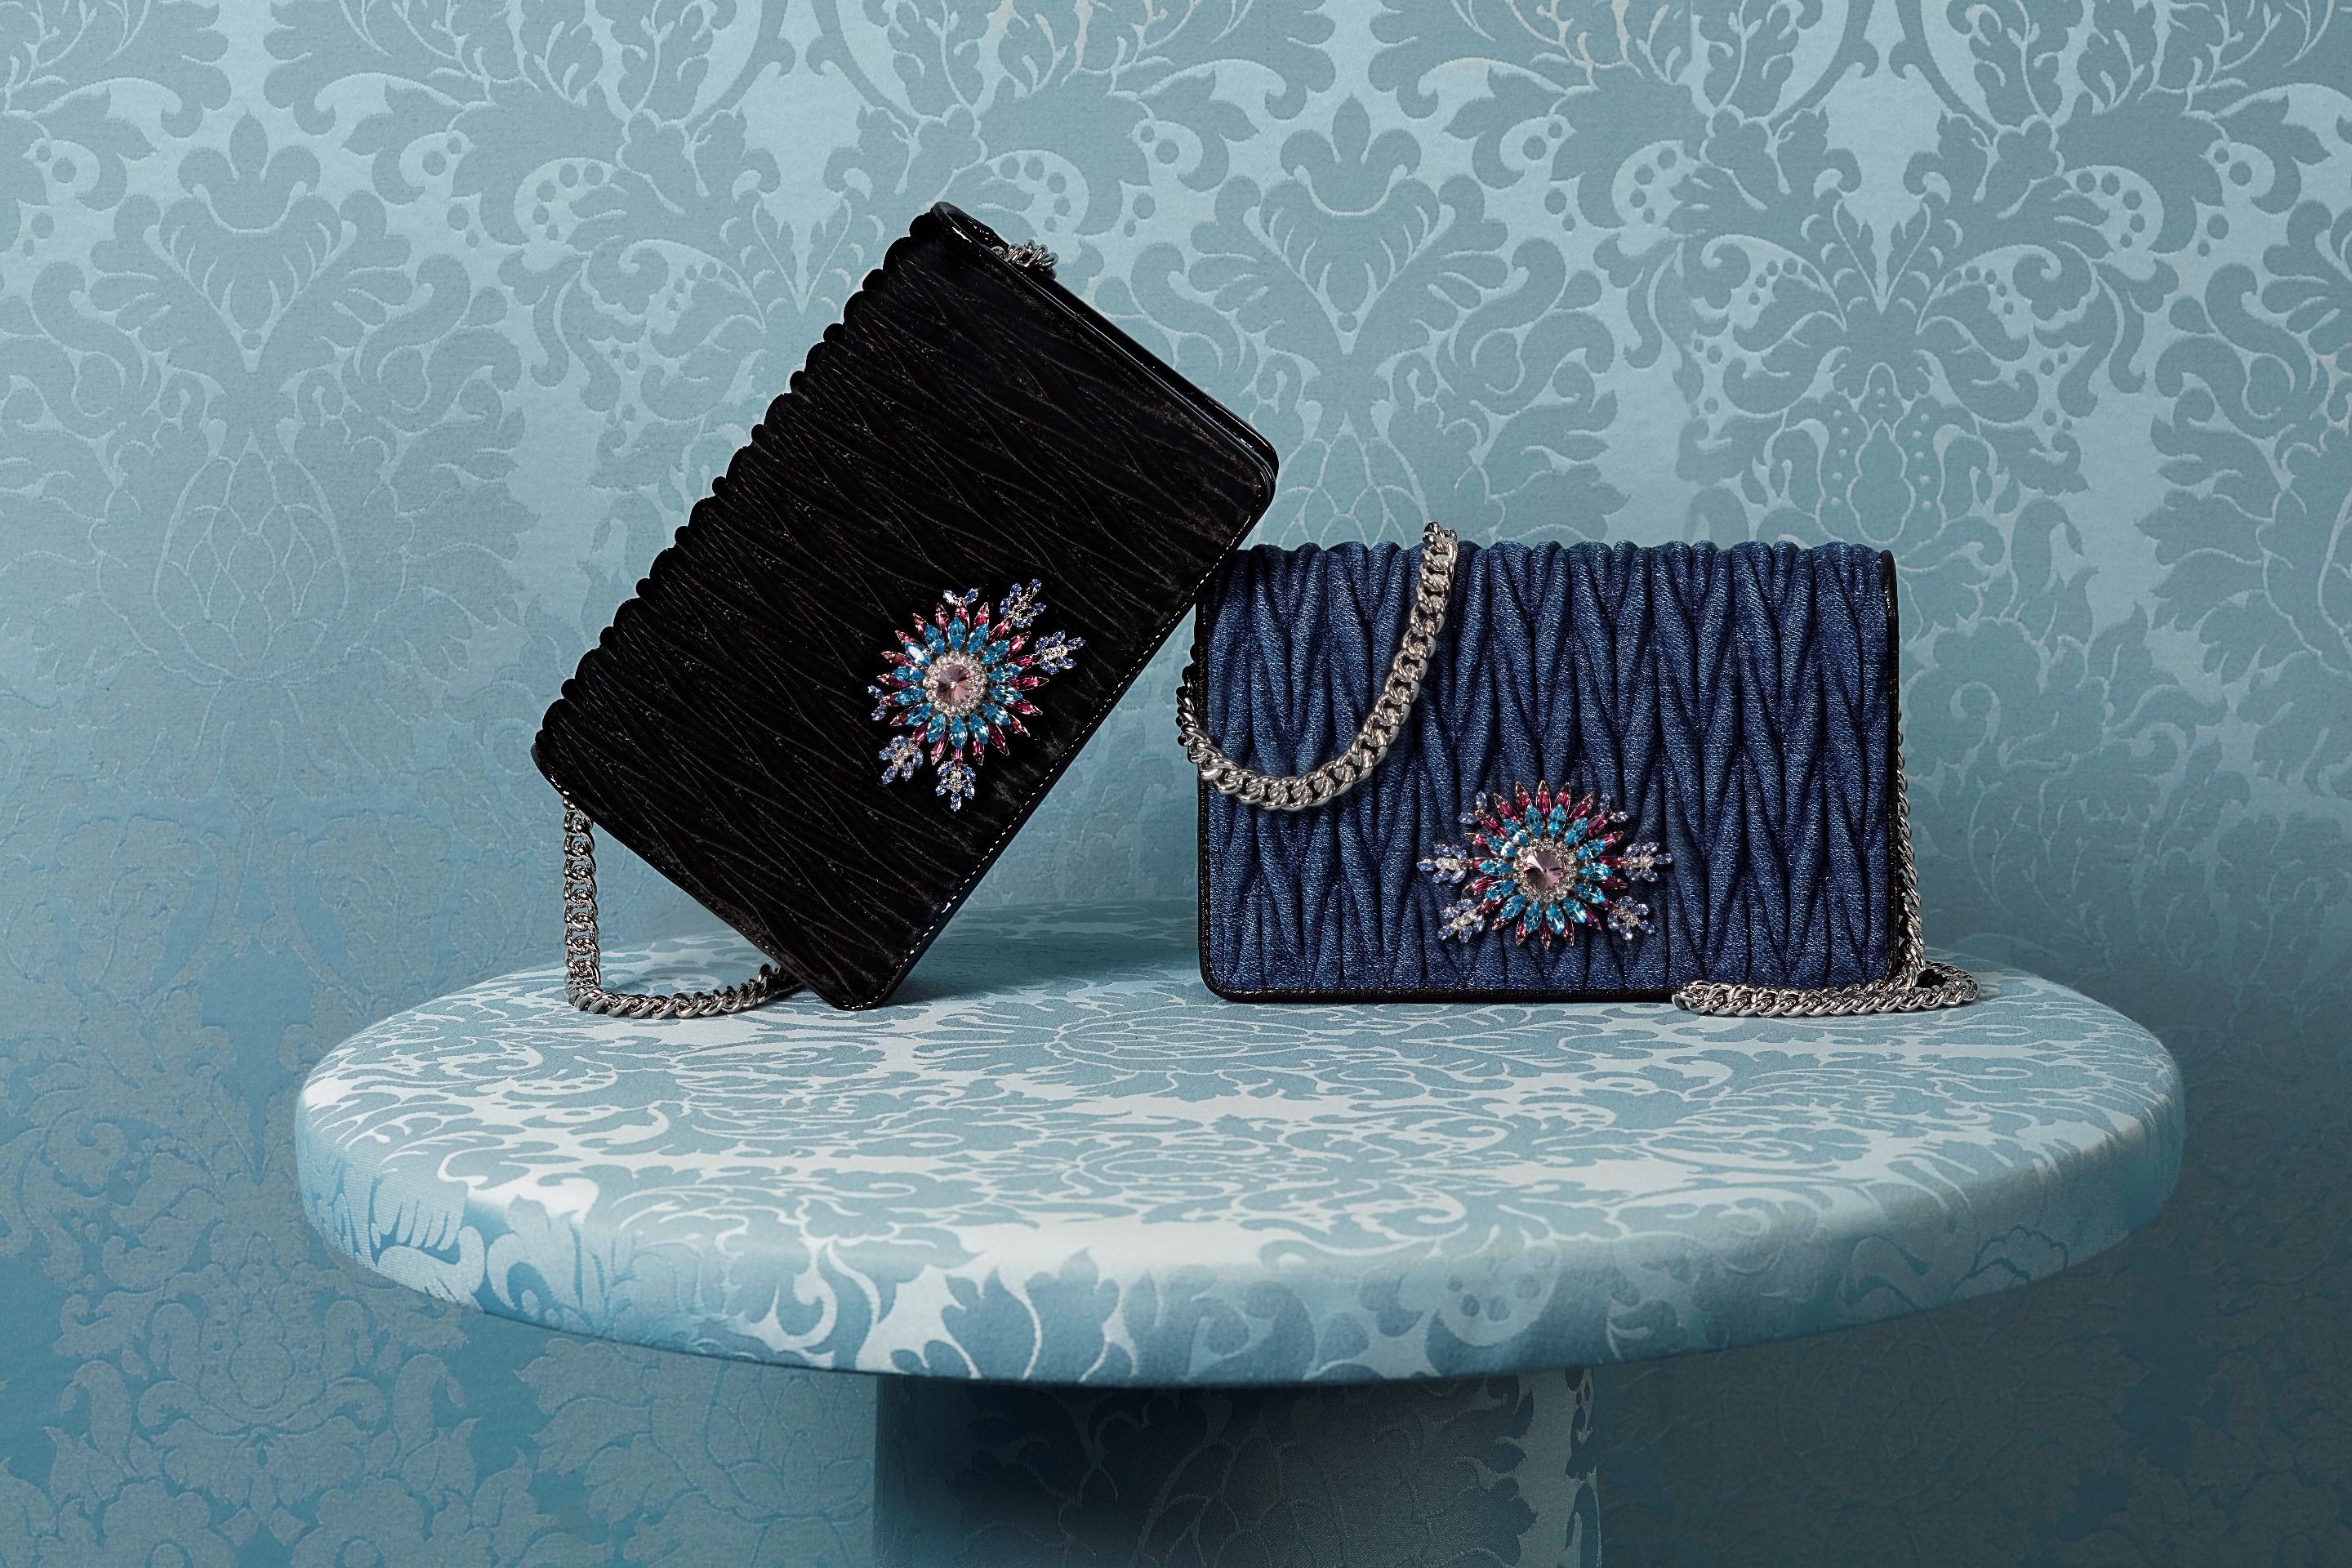 Miu Miu launches exclusive capsule collection for Hong Kong